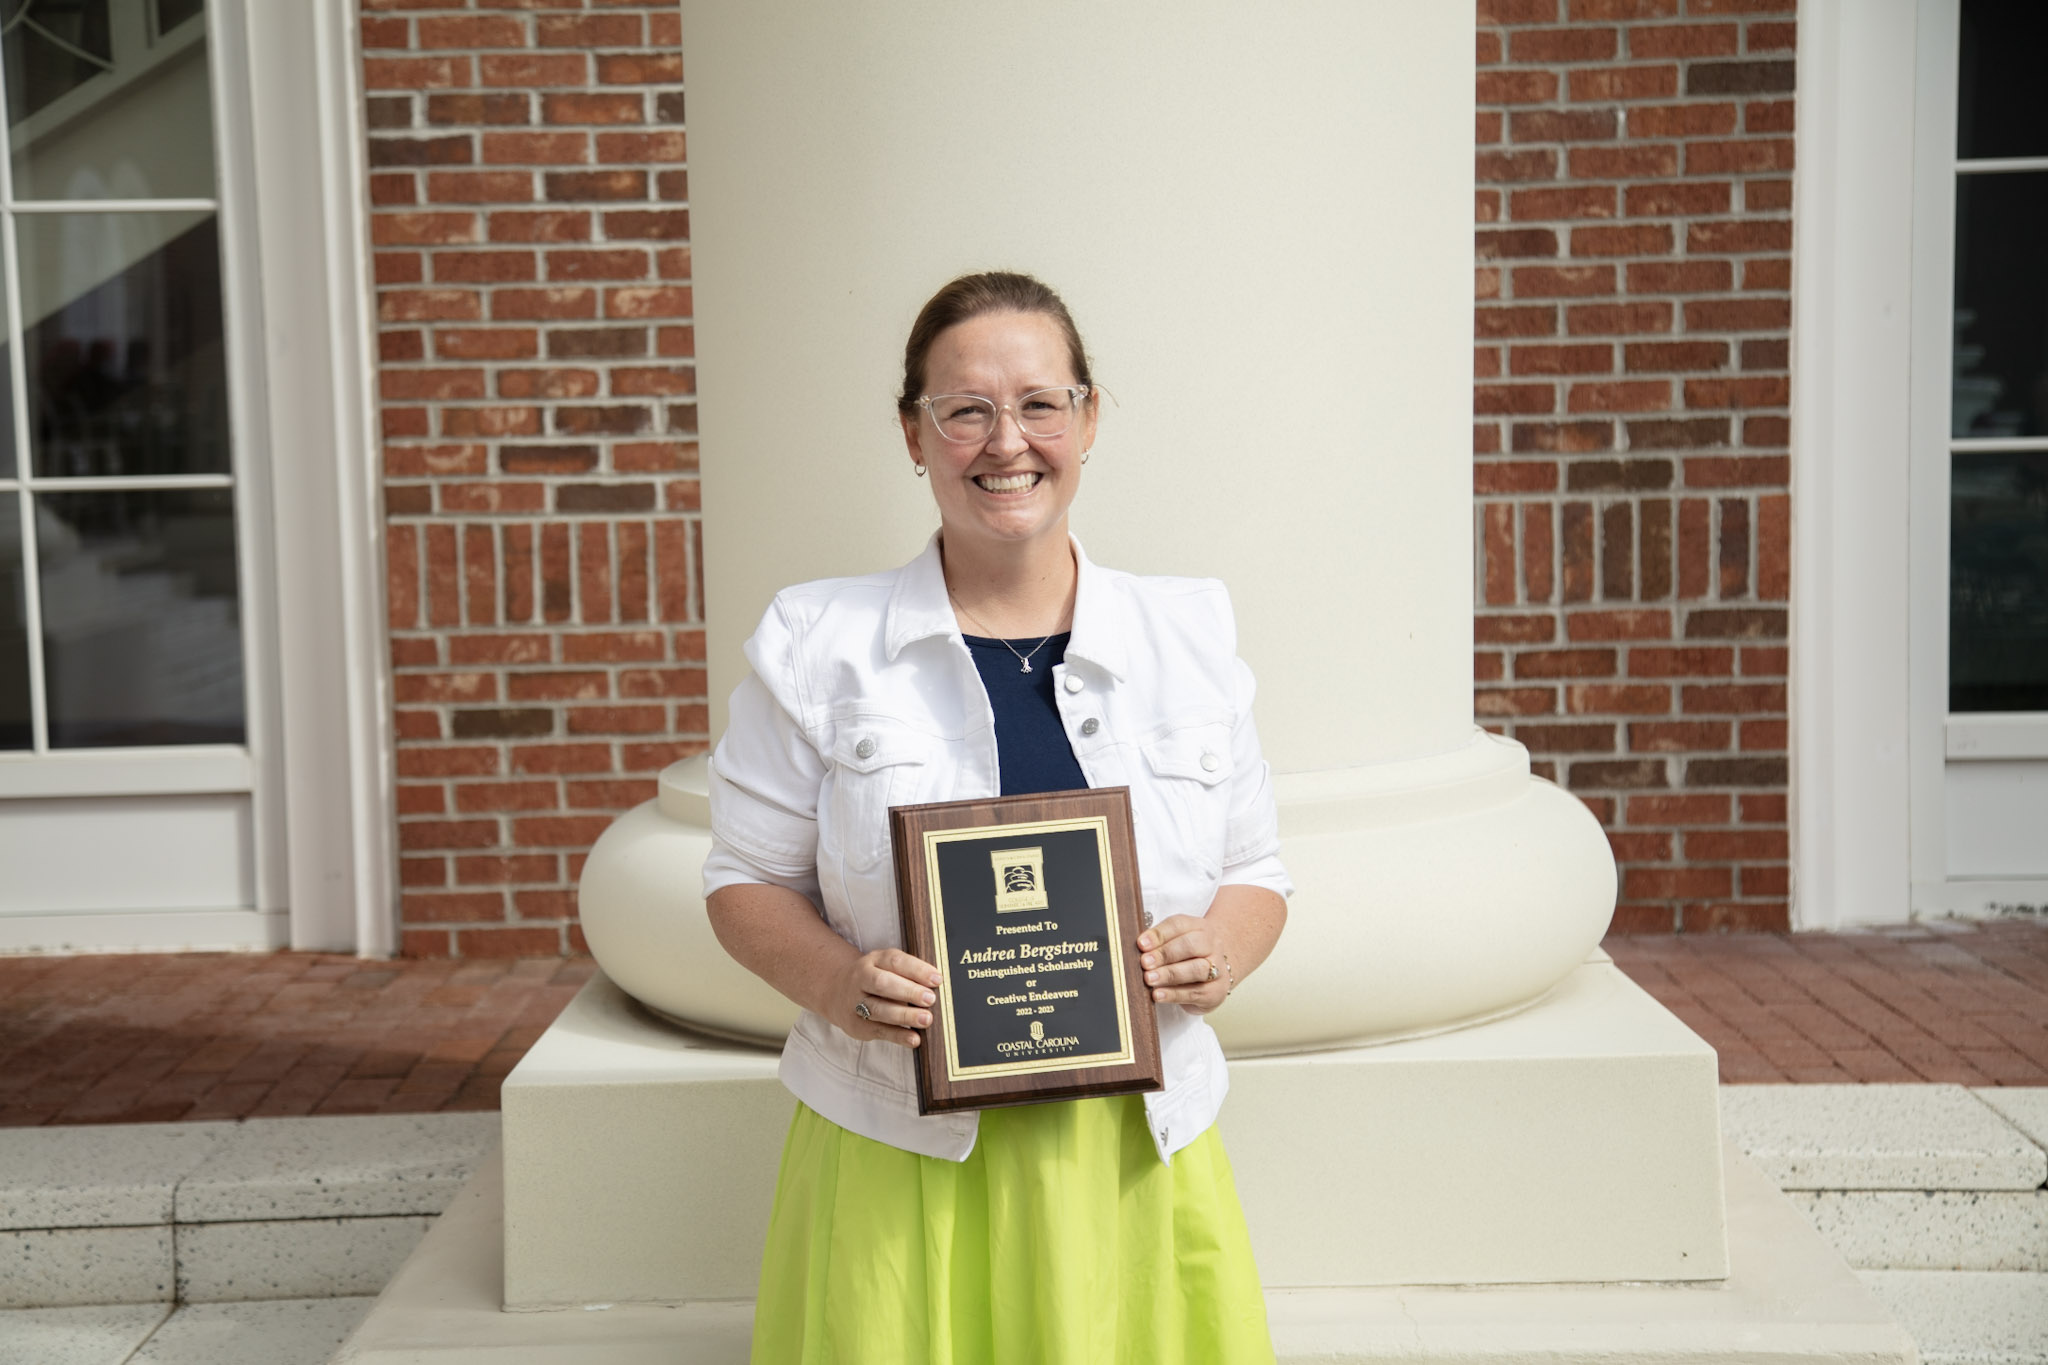 Image of Dr. Andrea Bergstrom holding an award